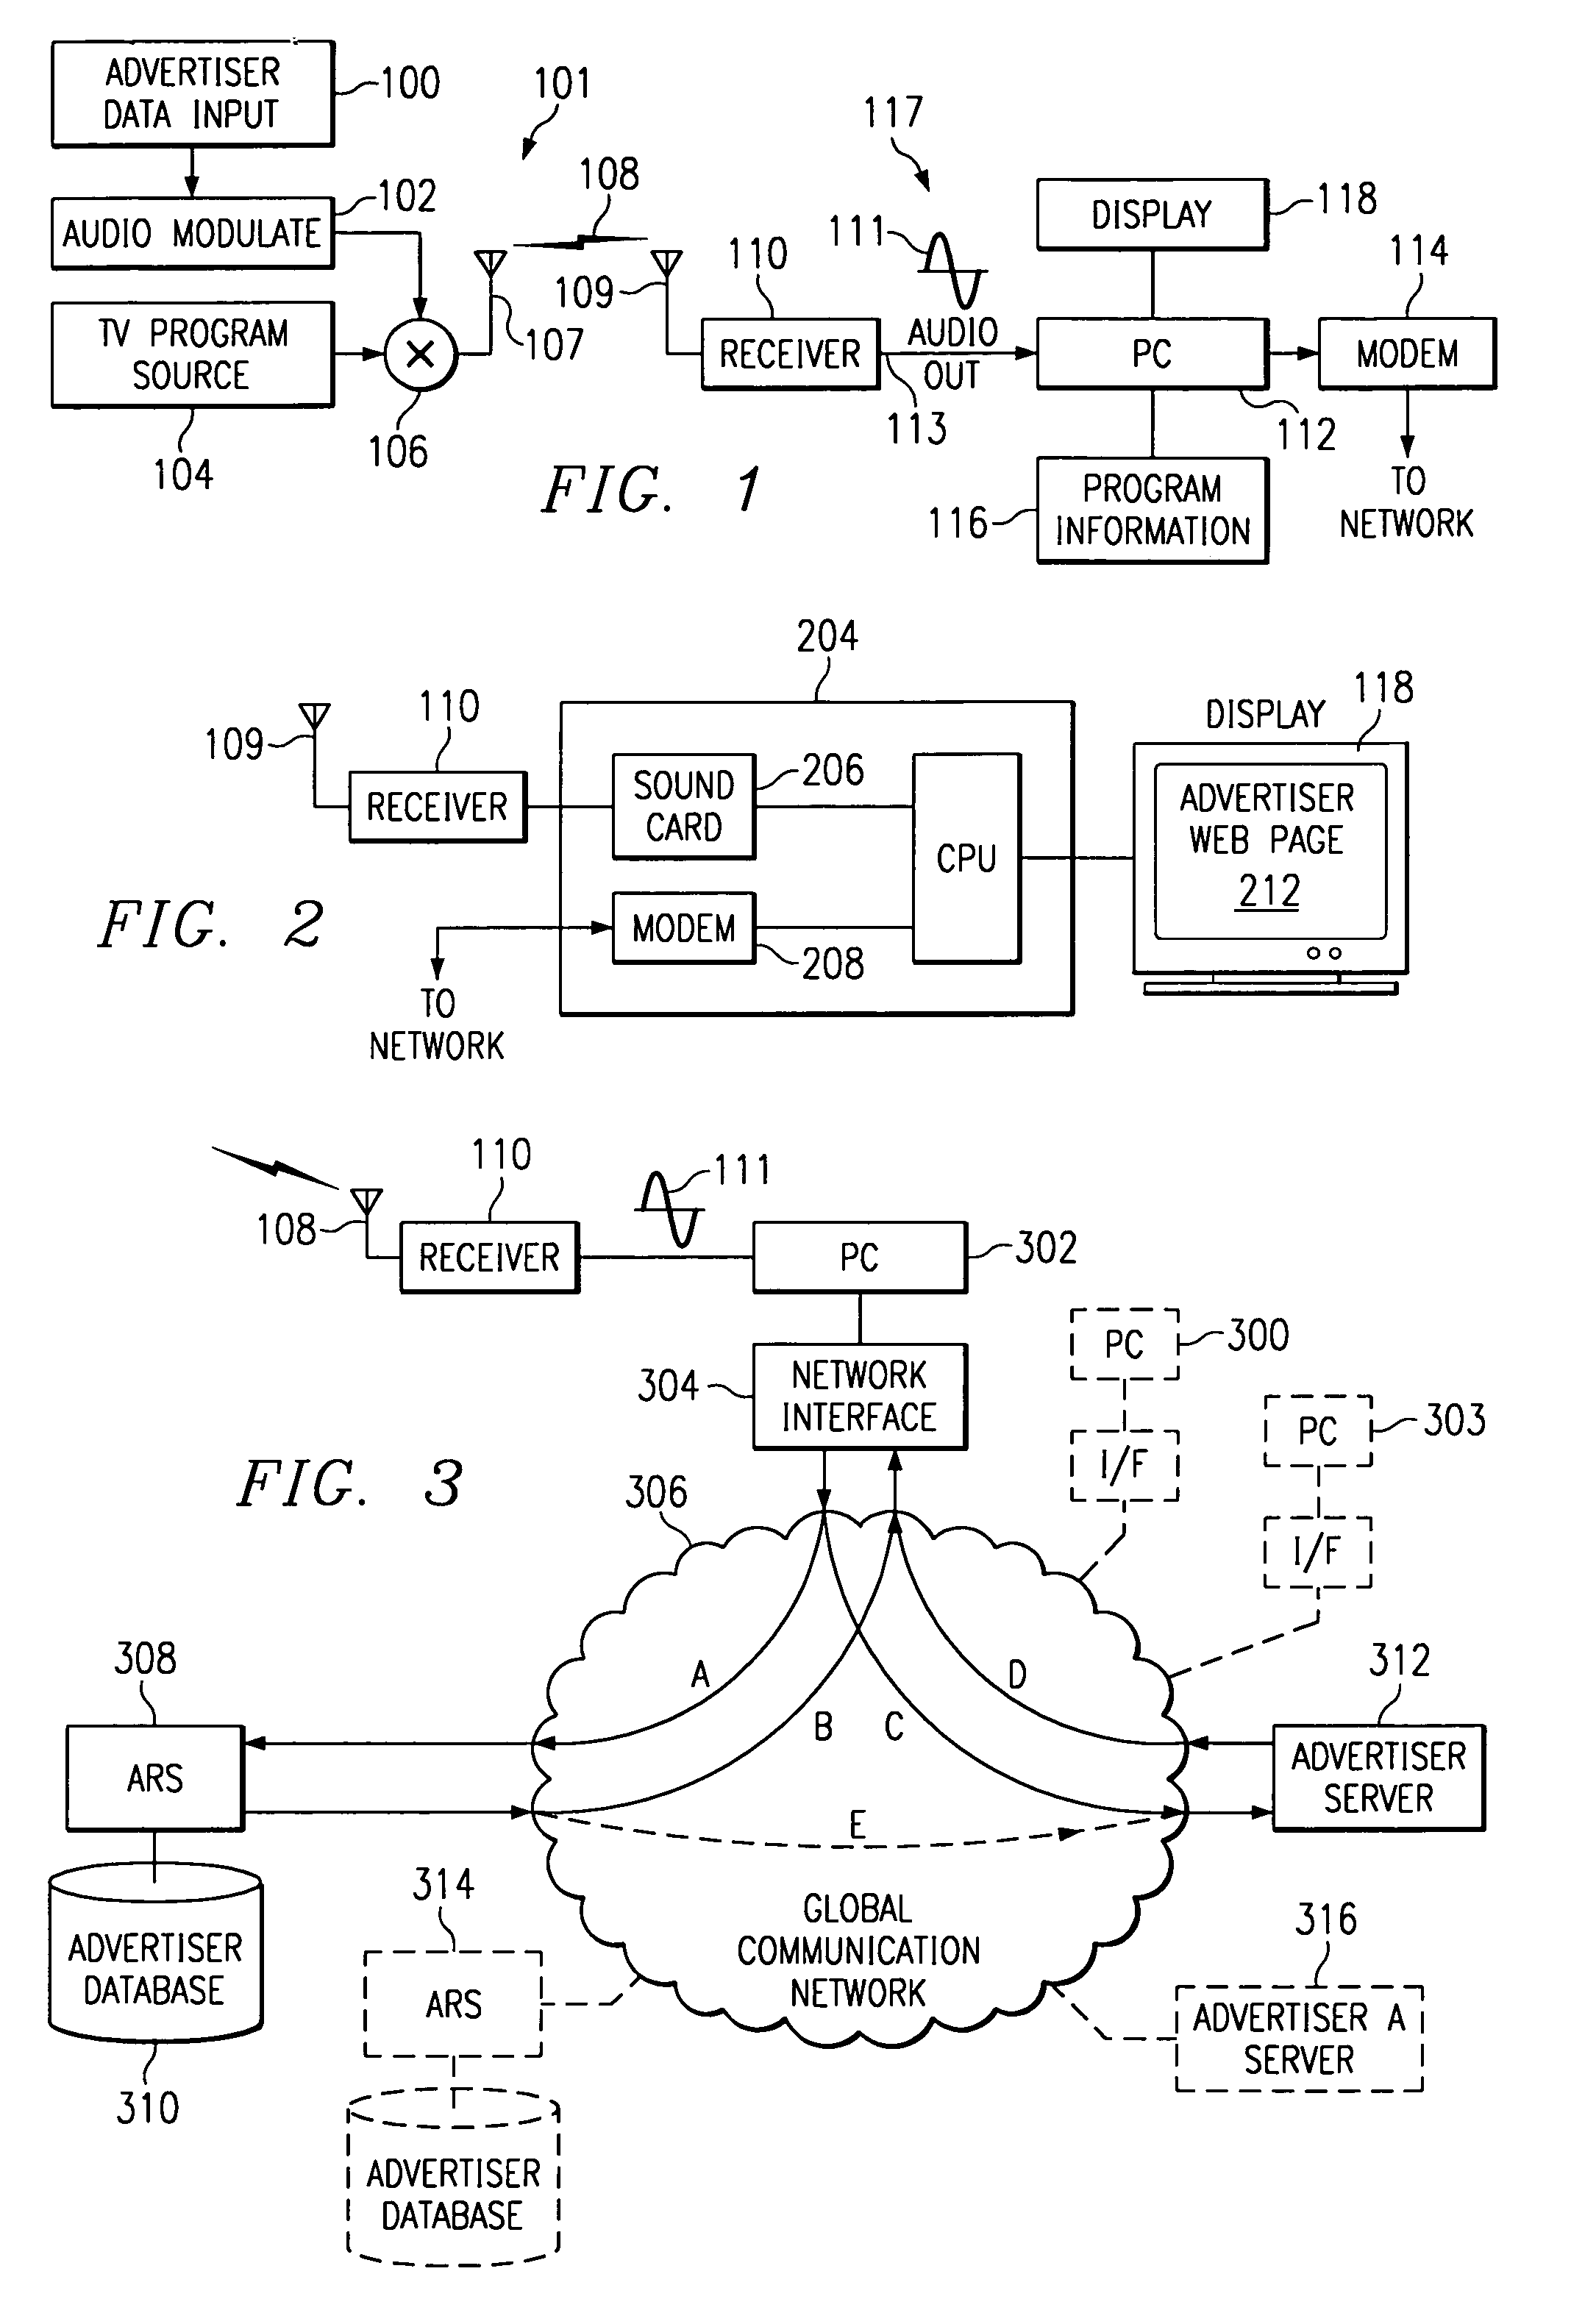 Method for controlling a computer using an embedded unique code in the content of CD media